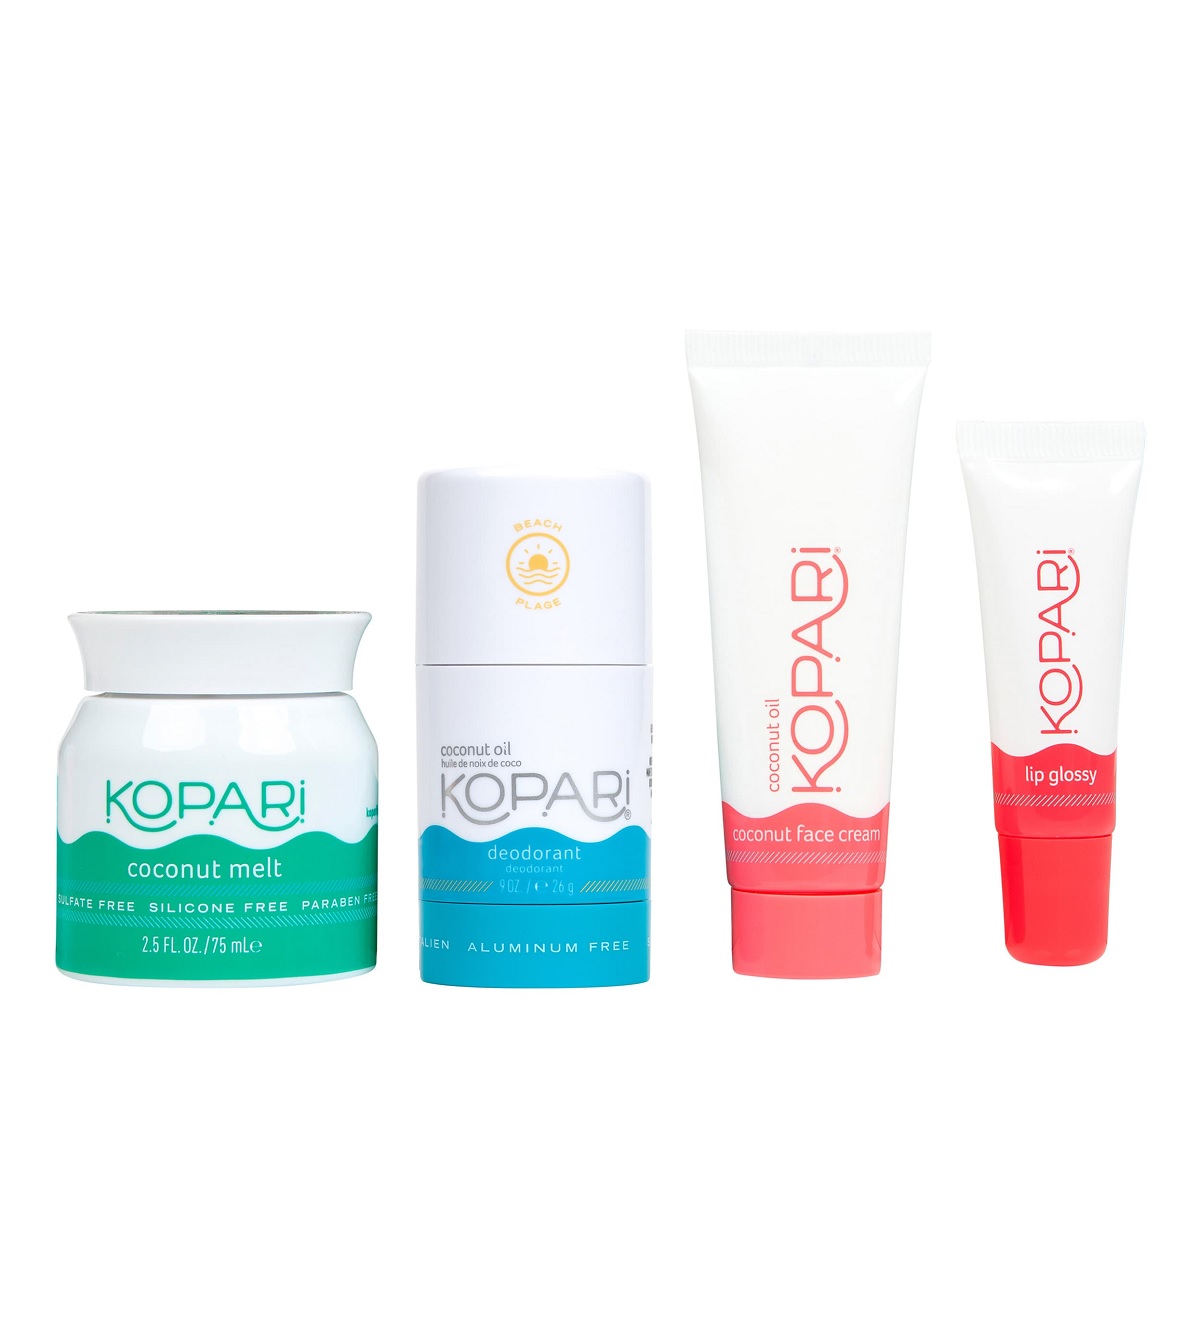 kopari beauty products at nordstrom sale